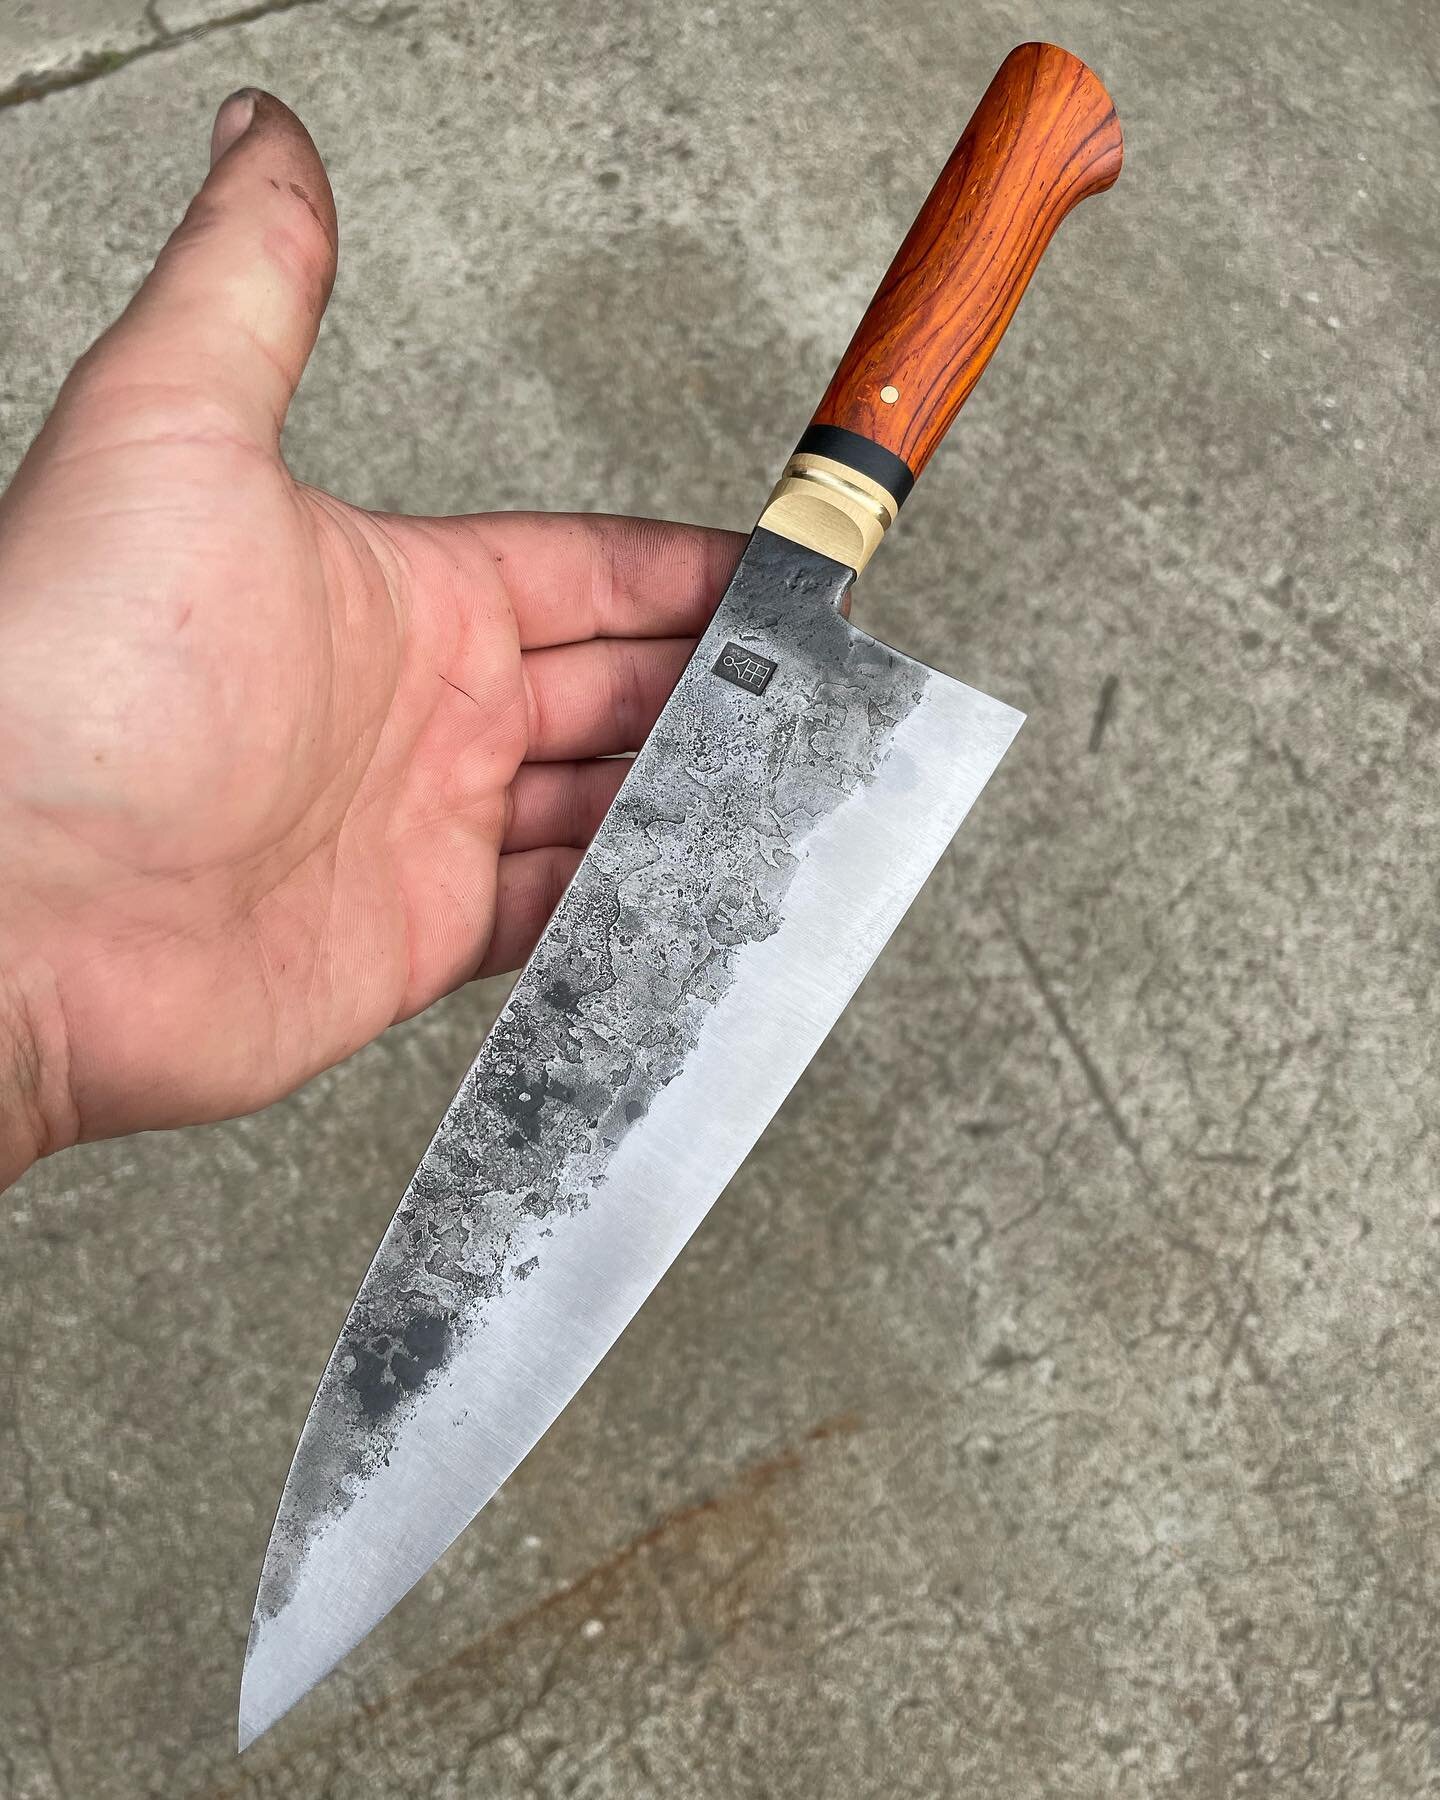 Recently sold 8&rdquo; hidden-tang chef with a more aggressive distal taper and solid brass bolster. 52100, and the other materials are black linen micarta and a rich cocobolo. 

#carbonsteel #chefsknife #handforged #forgedtotable